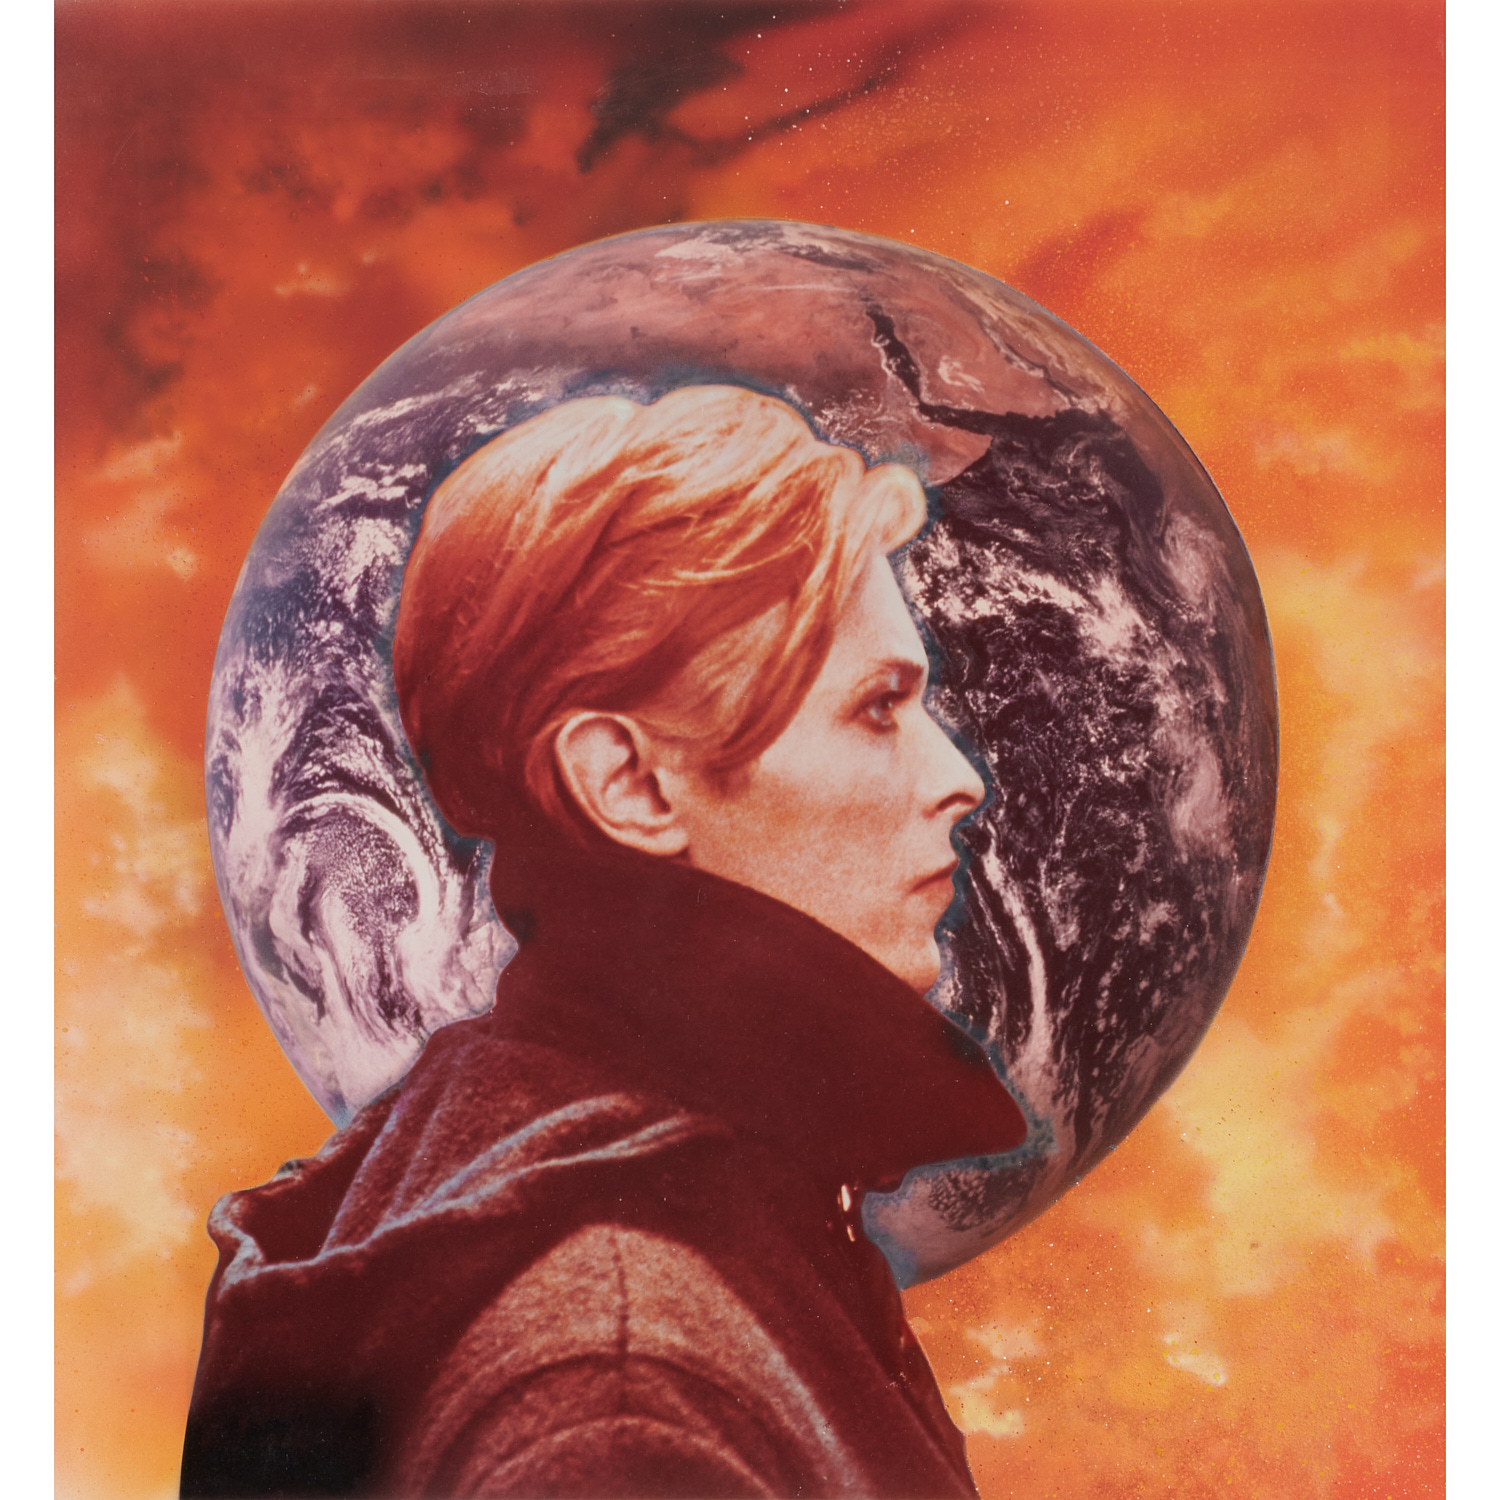 DAVID BOWIE, "MAN WHO FELL TO EARTH"